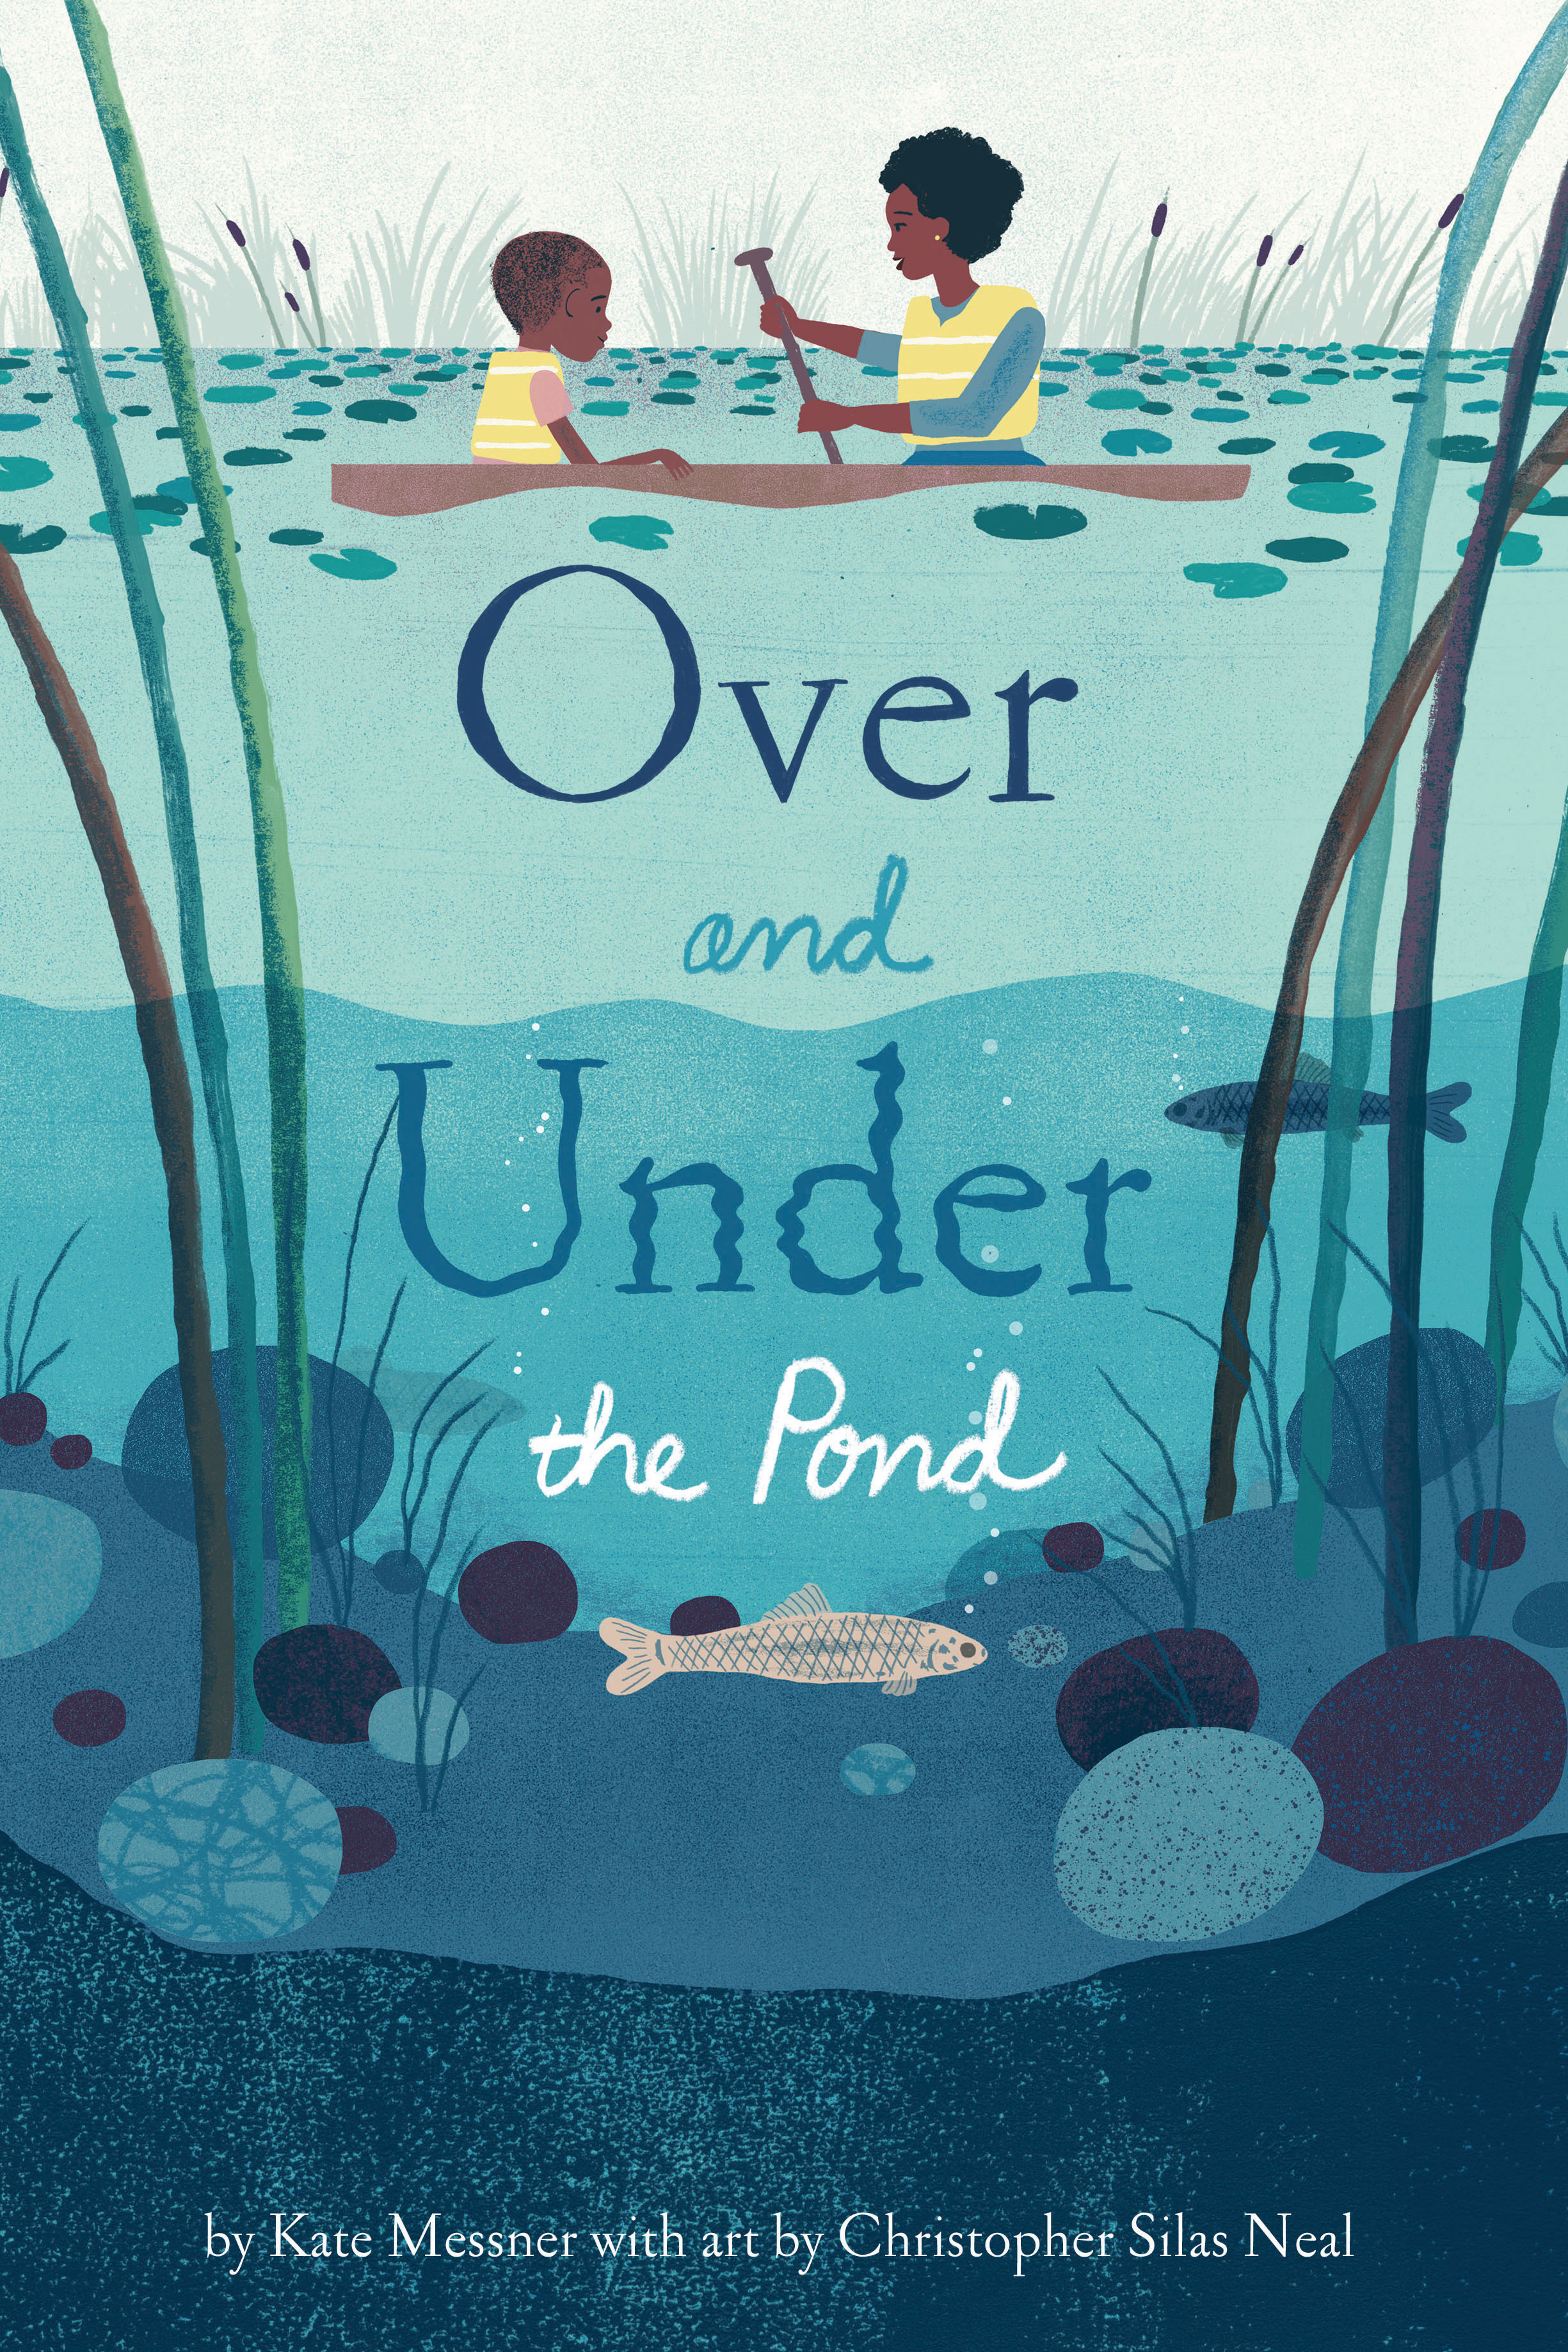 Sunday Story Time with Christopher Silas Neal (Illustrator of Over and Under the Pond)